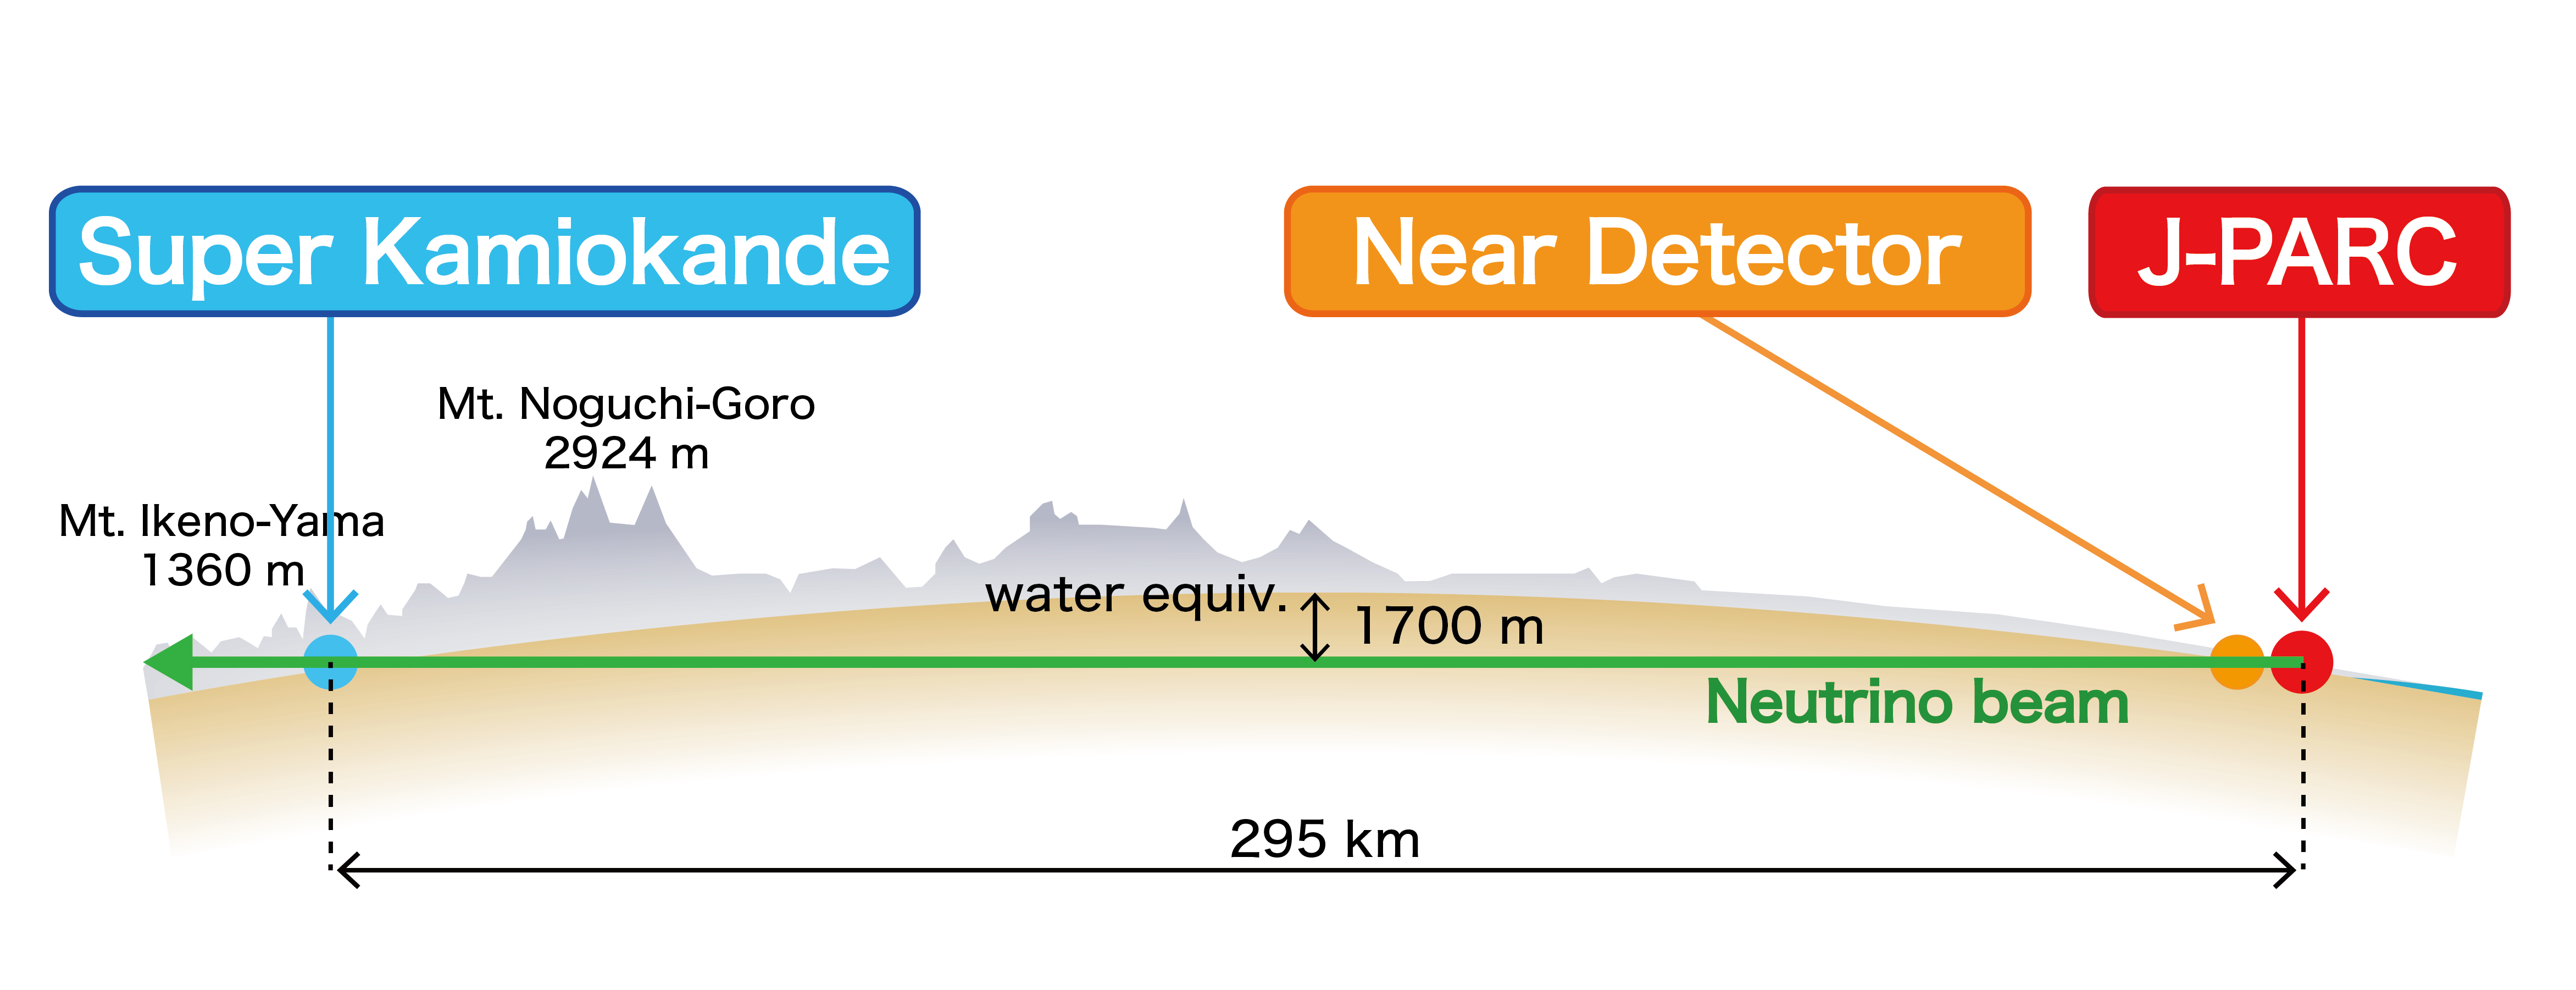 T2K diagram. Super Kamiokande is amongst mountains, and the Near Detector and J-PARC, emitting a neutrino beam, 295 km away